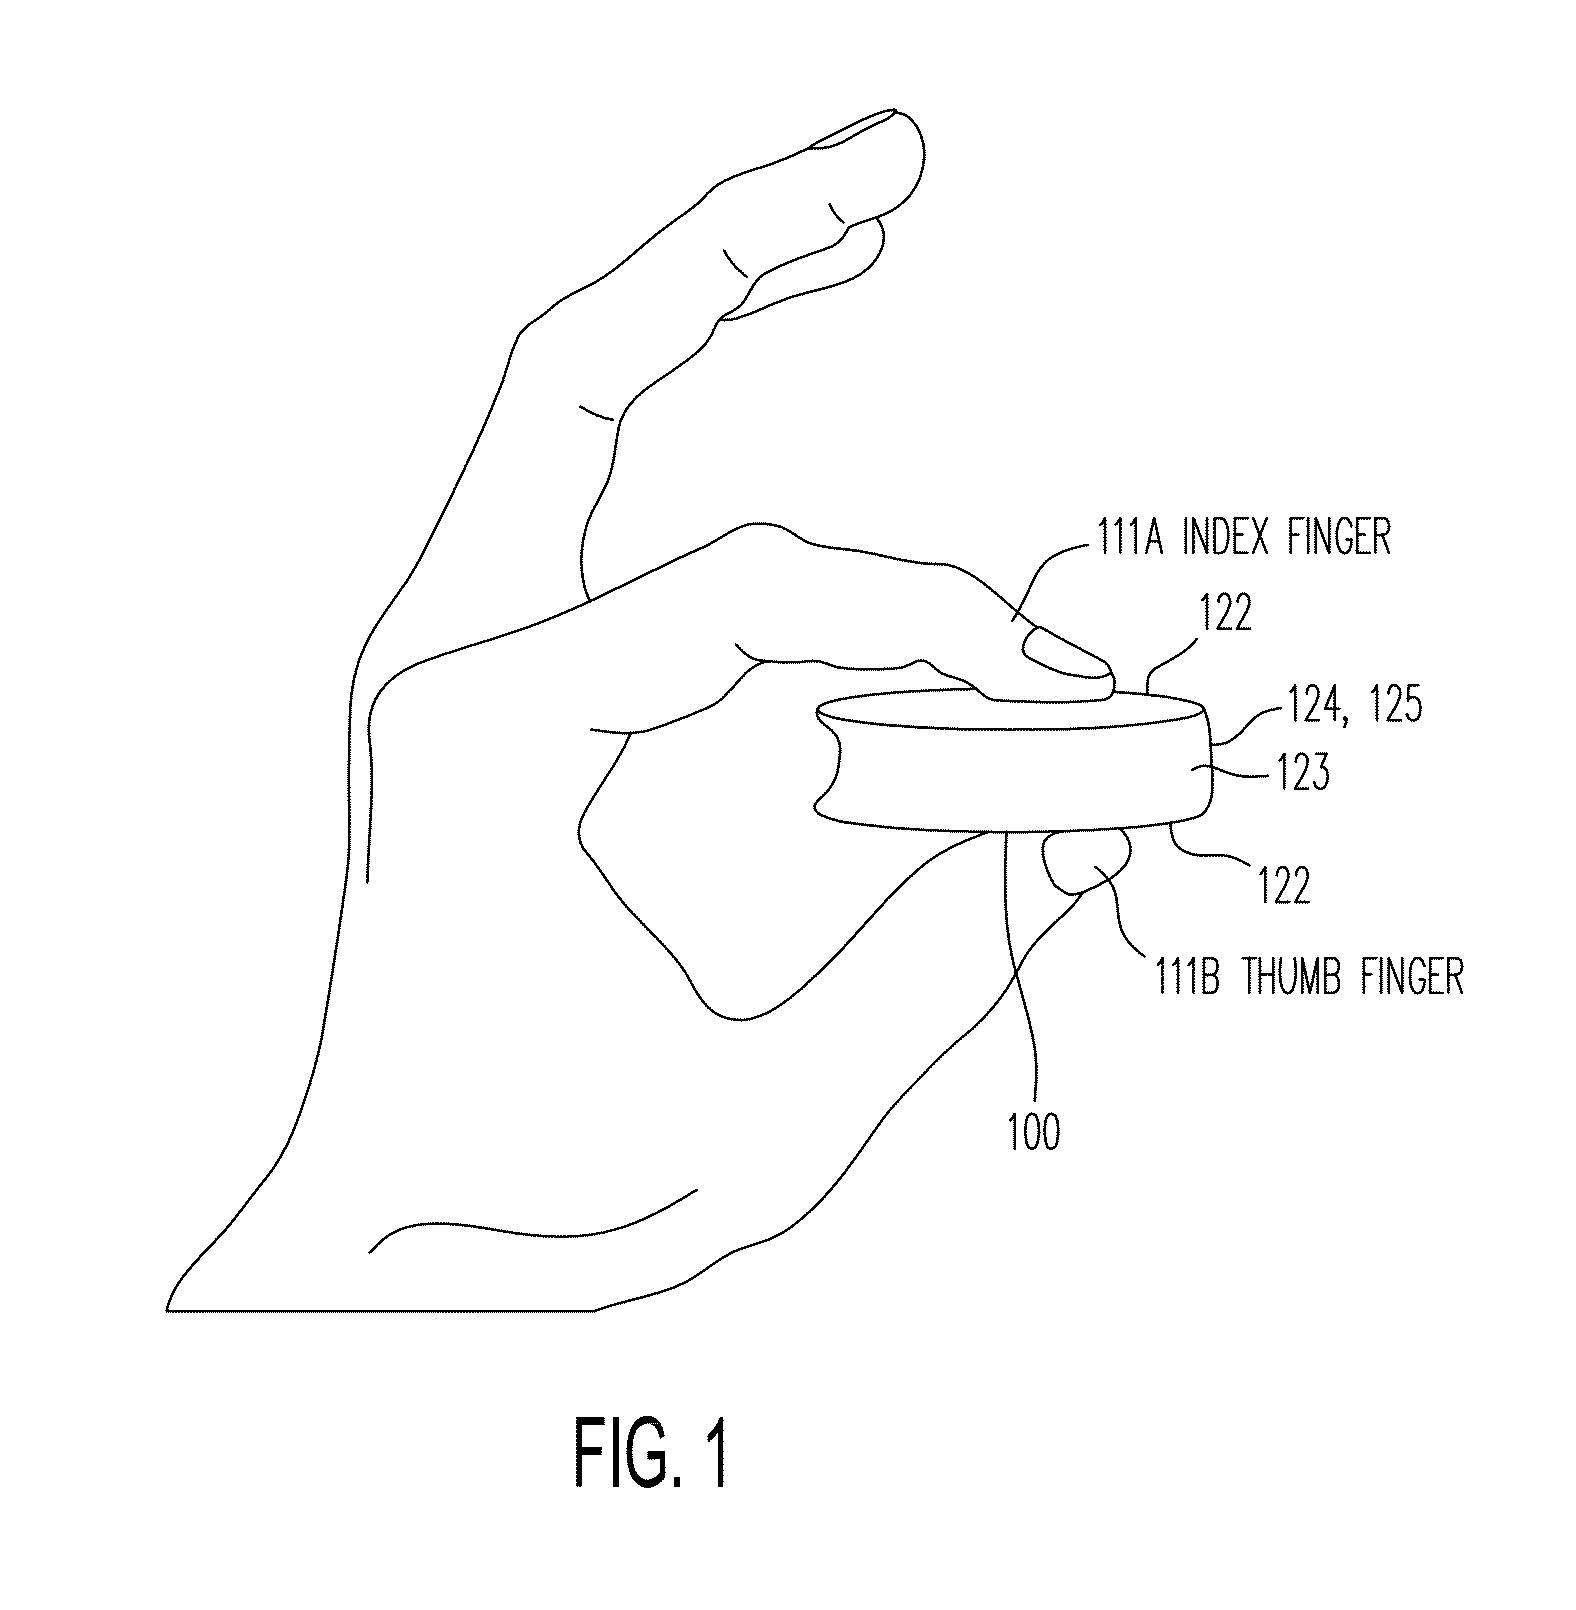 Portable device with multiple integrated sensors for vital signs scanning